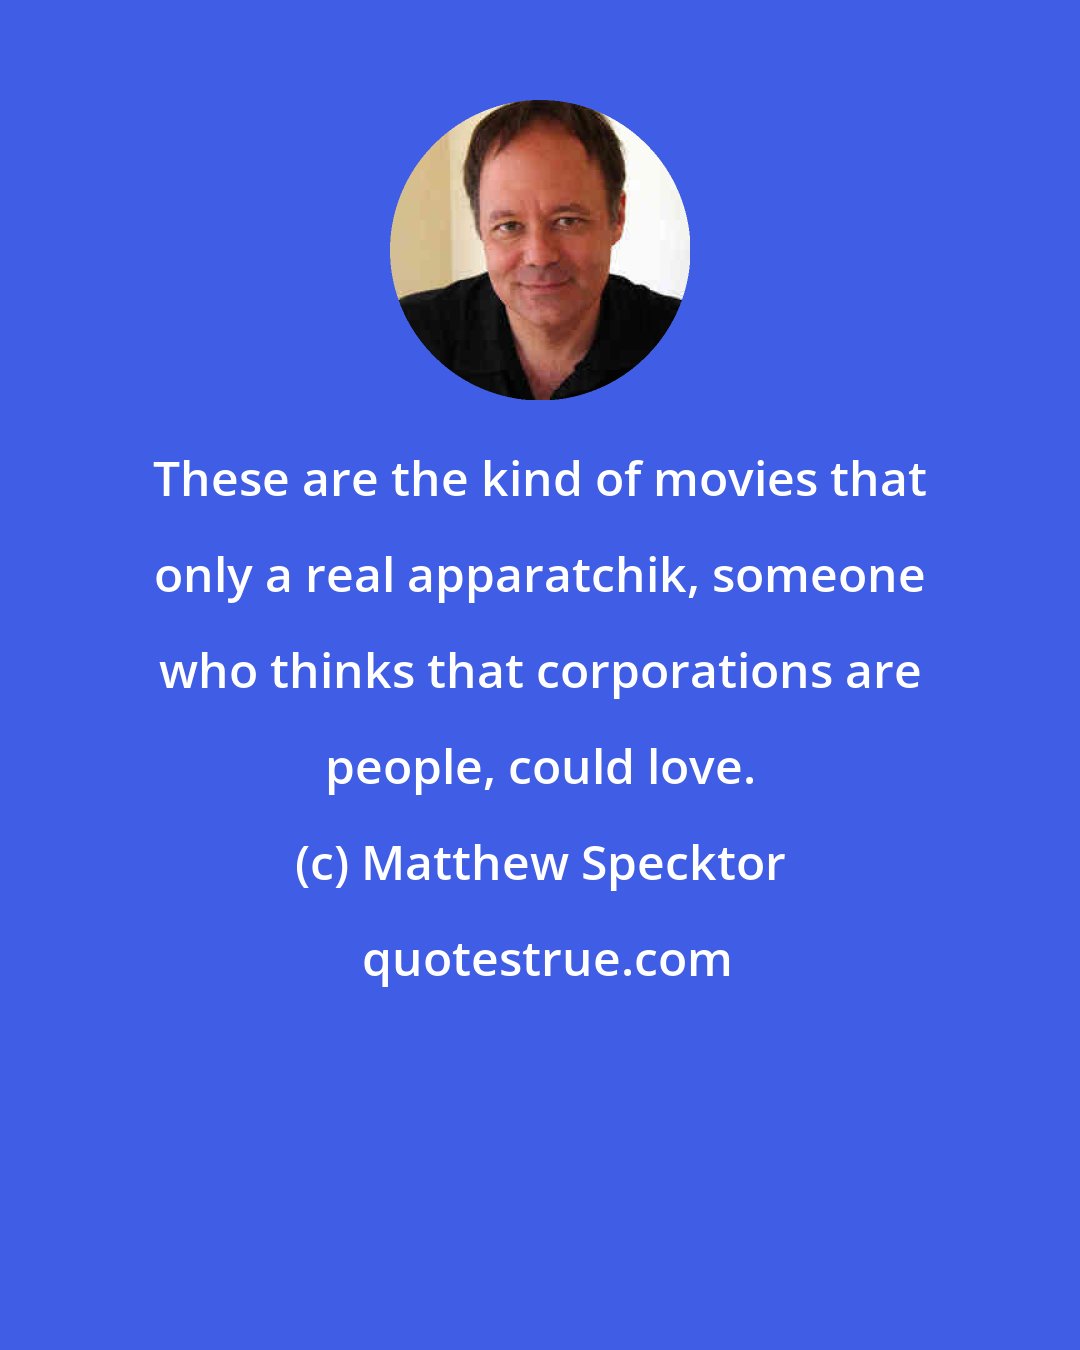 Matthew Specktor: These are the kind of movies that only a real apparatchik, someone who thinks that corporations are people, could love.